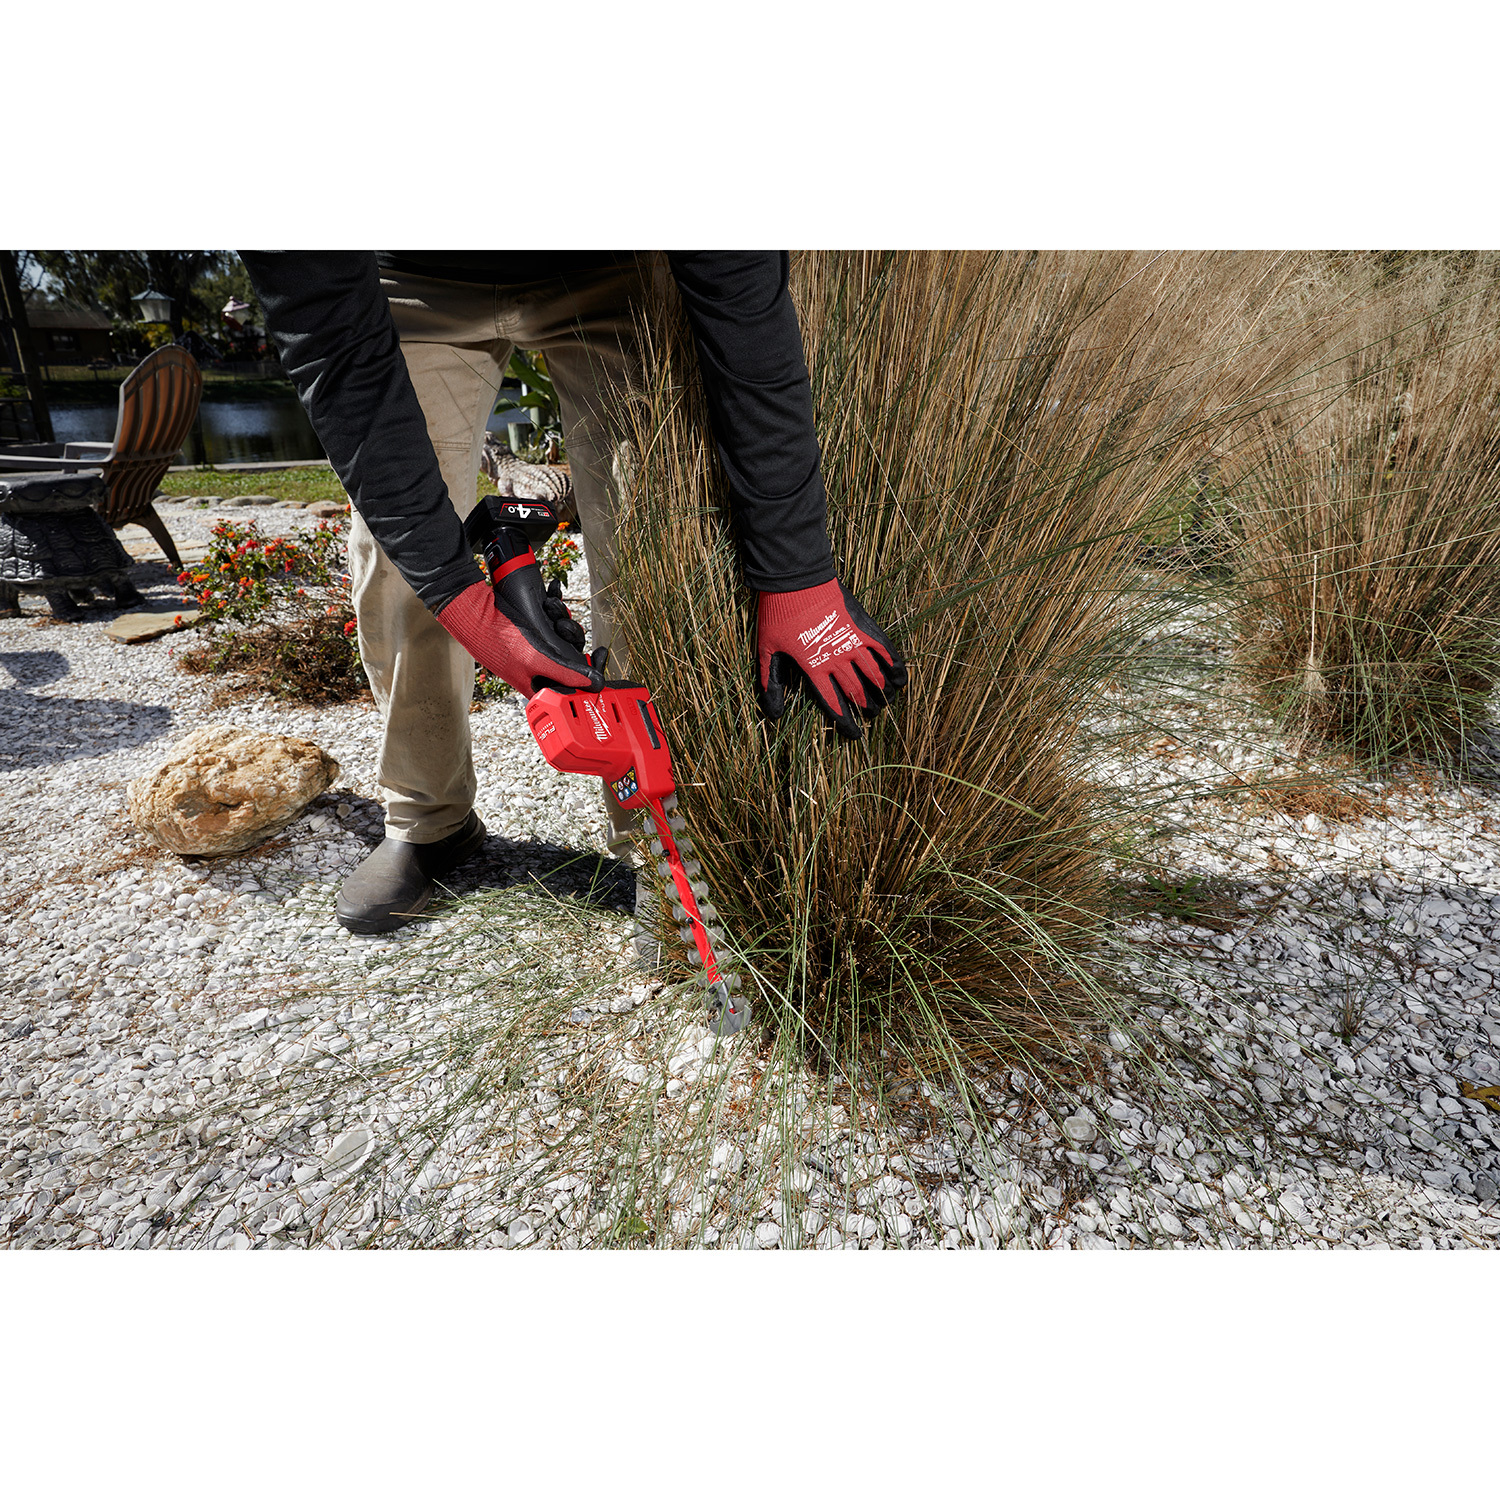 Milwaukee 12V FUEL Hedge Trimmer (Tool Only) M12FHT0